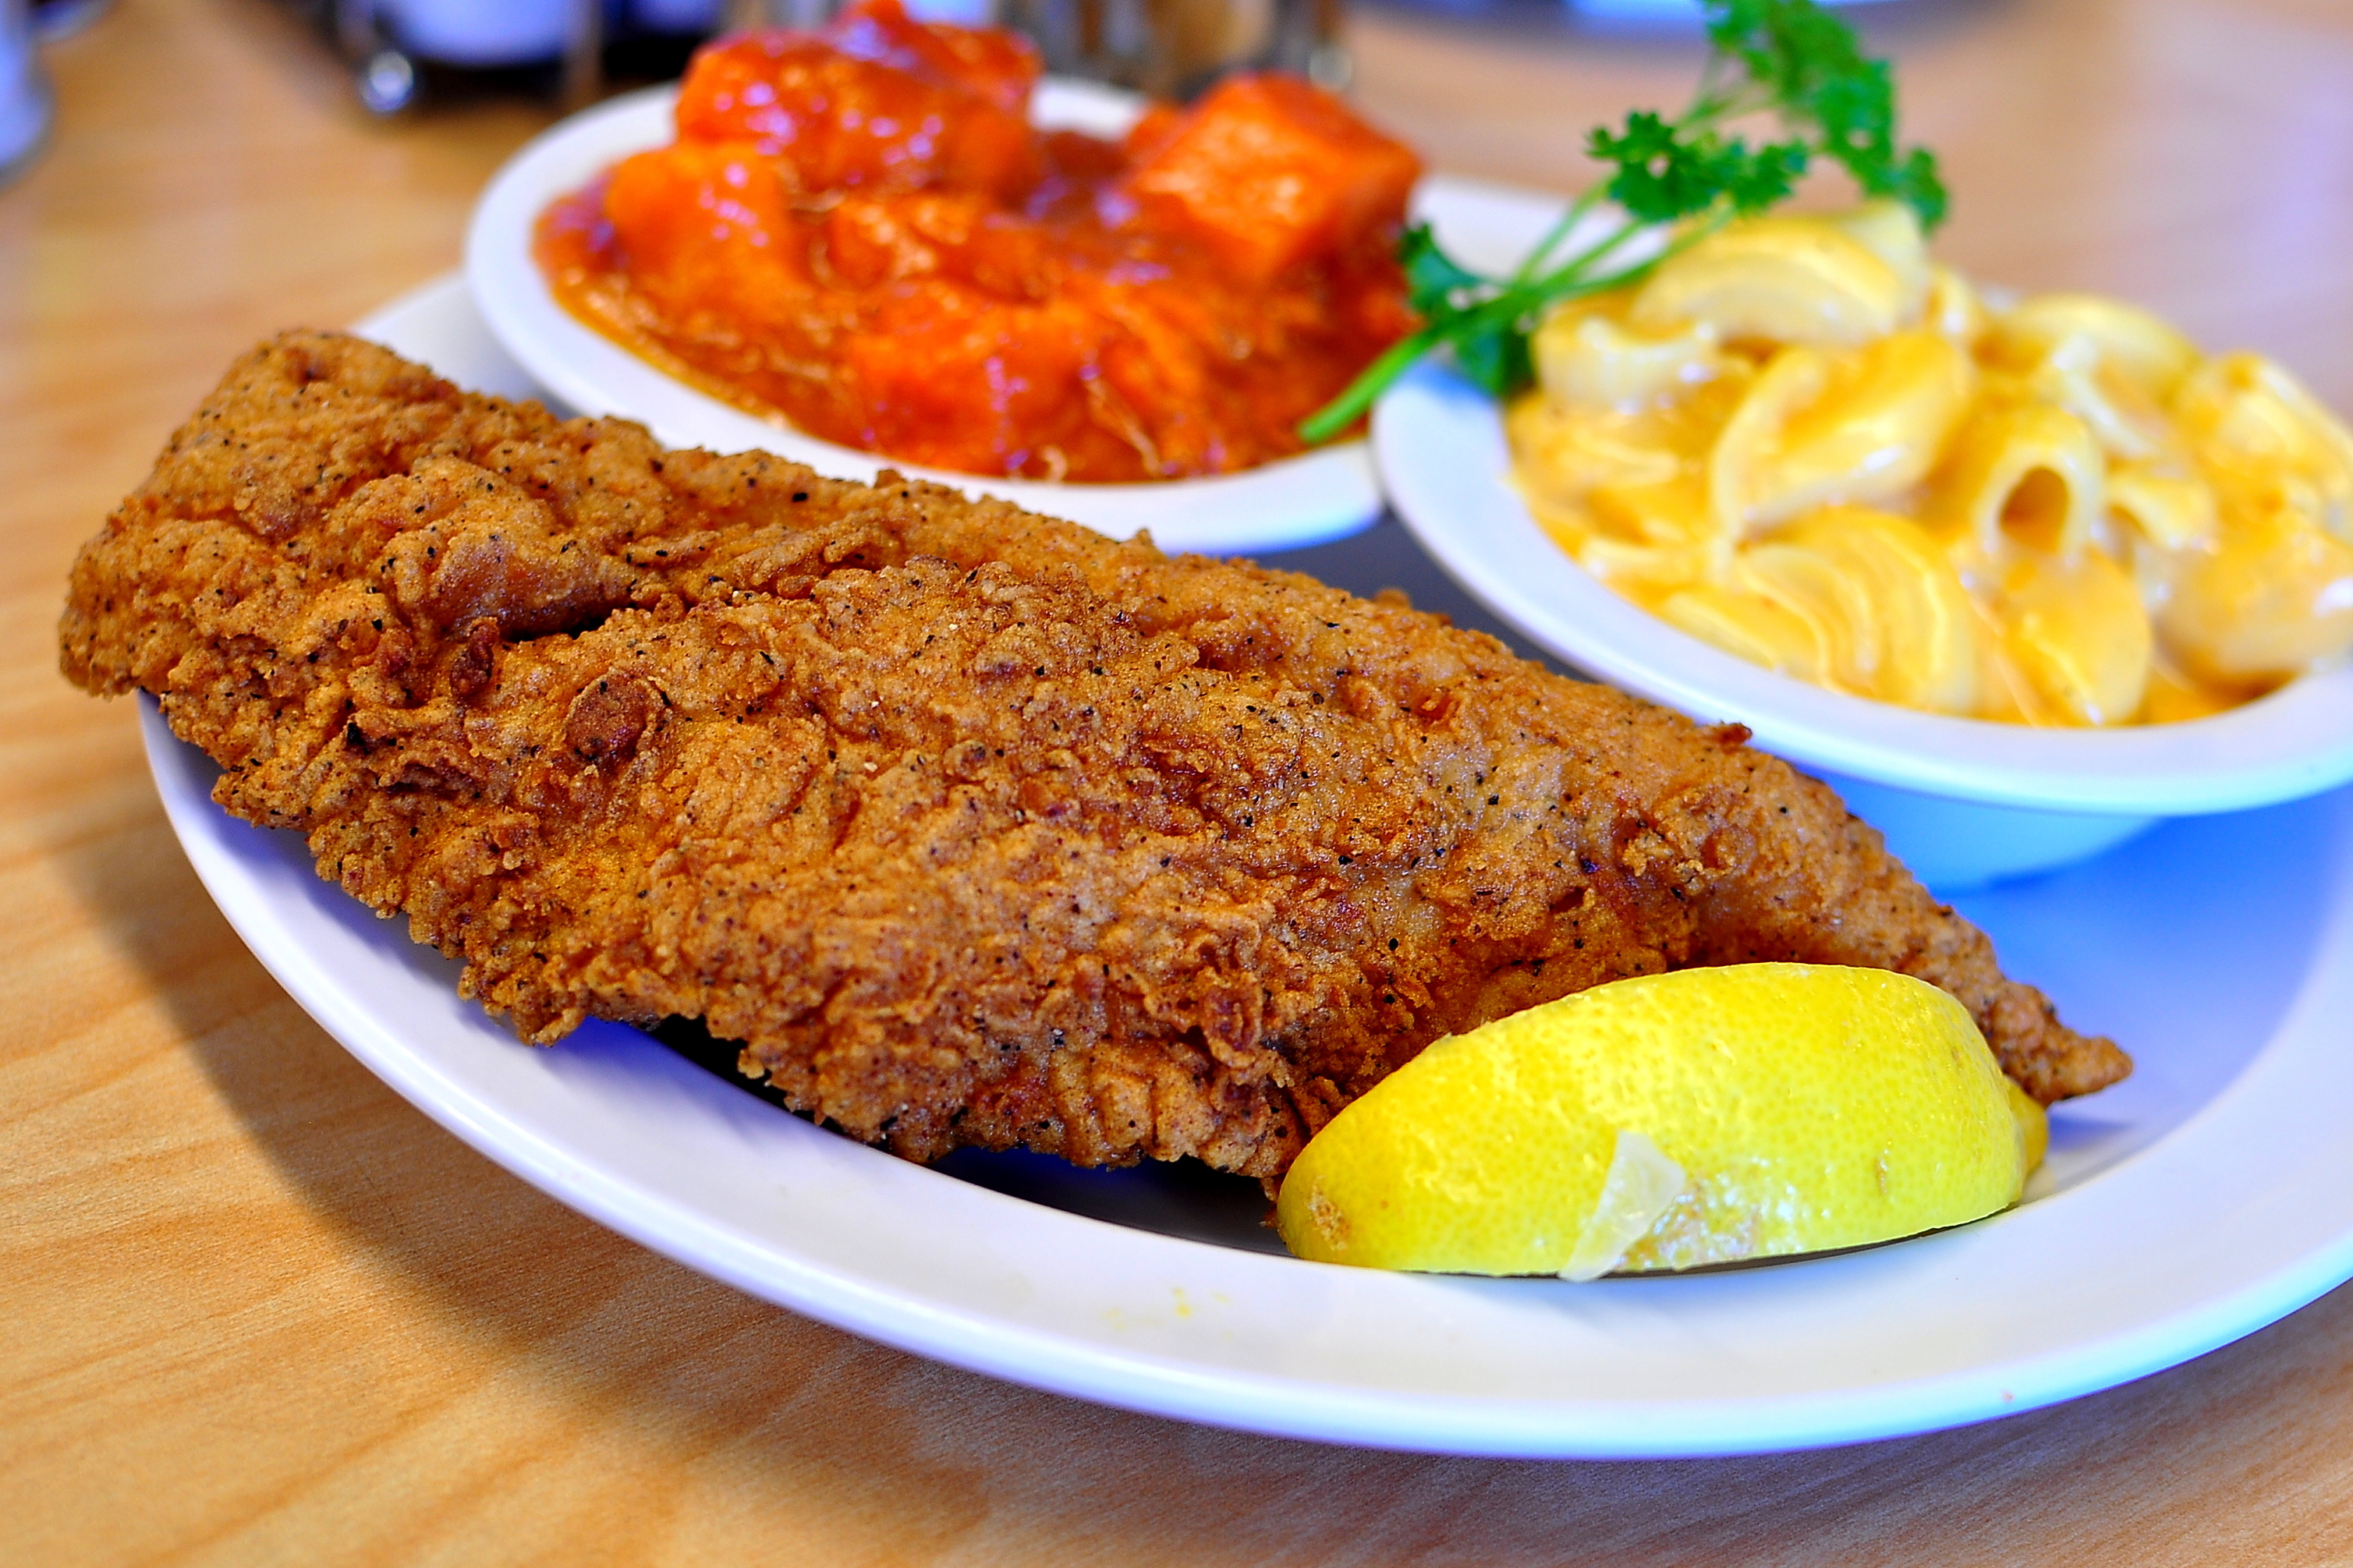 A platter of fried fish from Serving Spoon in Inglewood, California on a wooden table.